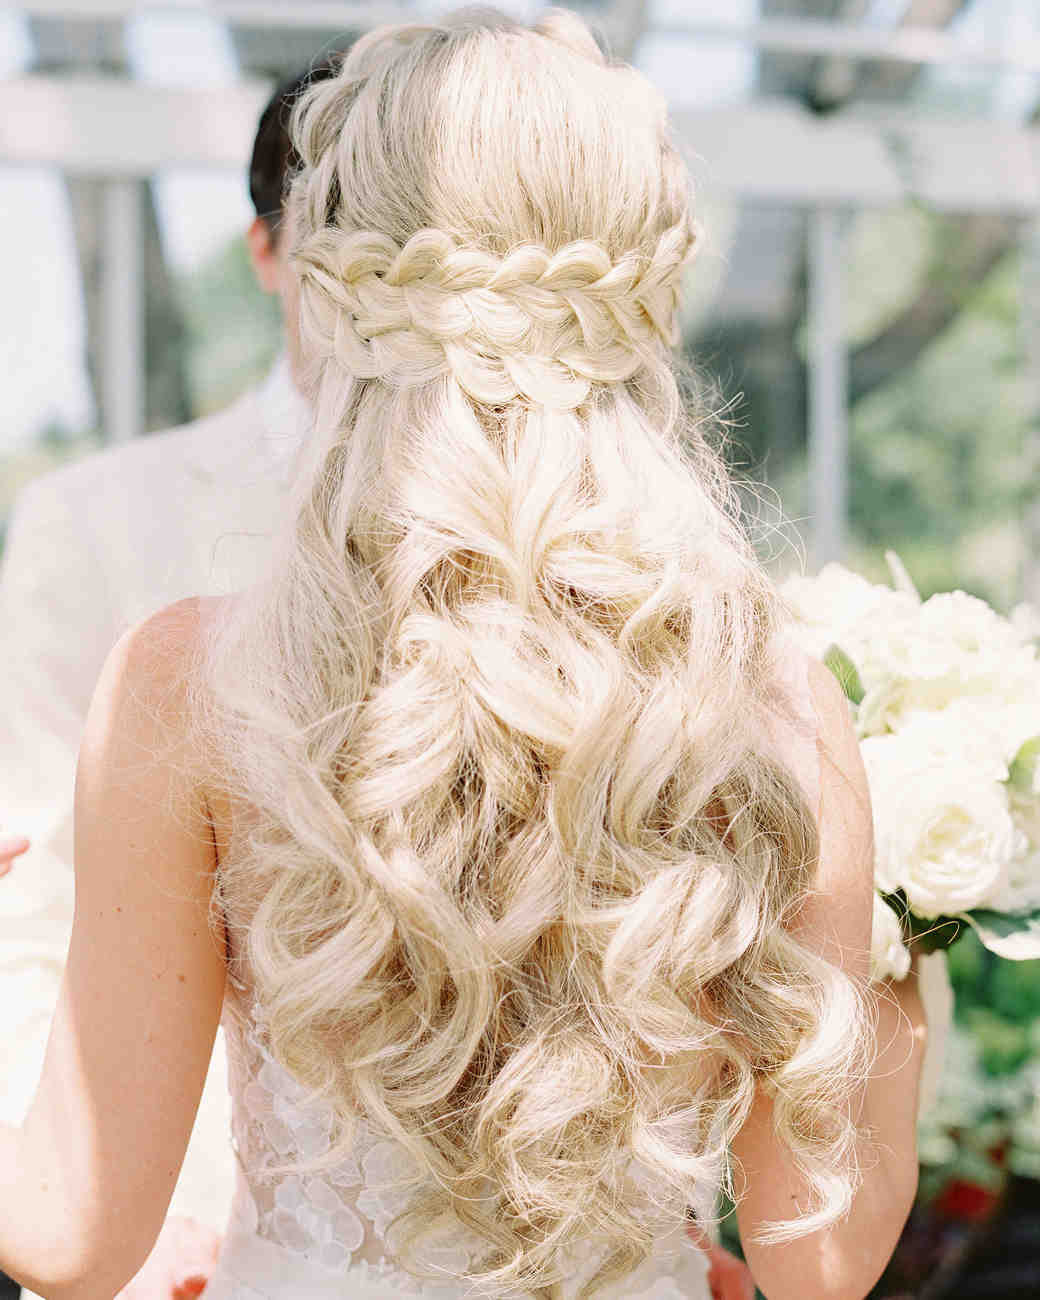 Half Up Half Down Wedding Hairstyles With Braids
 28 Half Up Half Down Wedding Hairstyles We Love